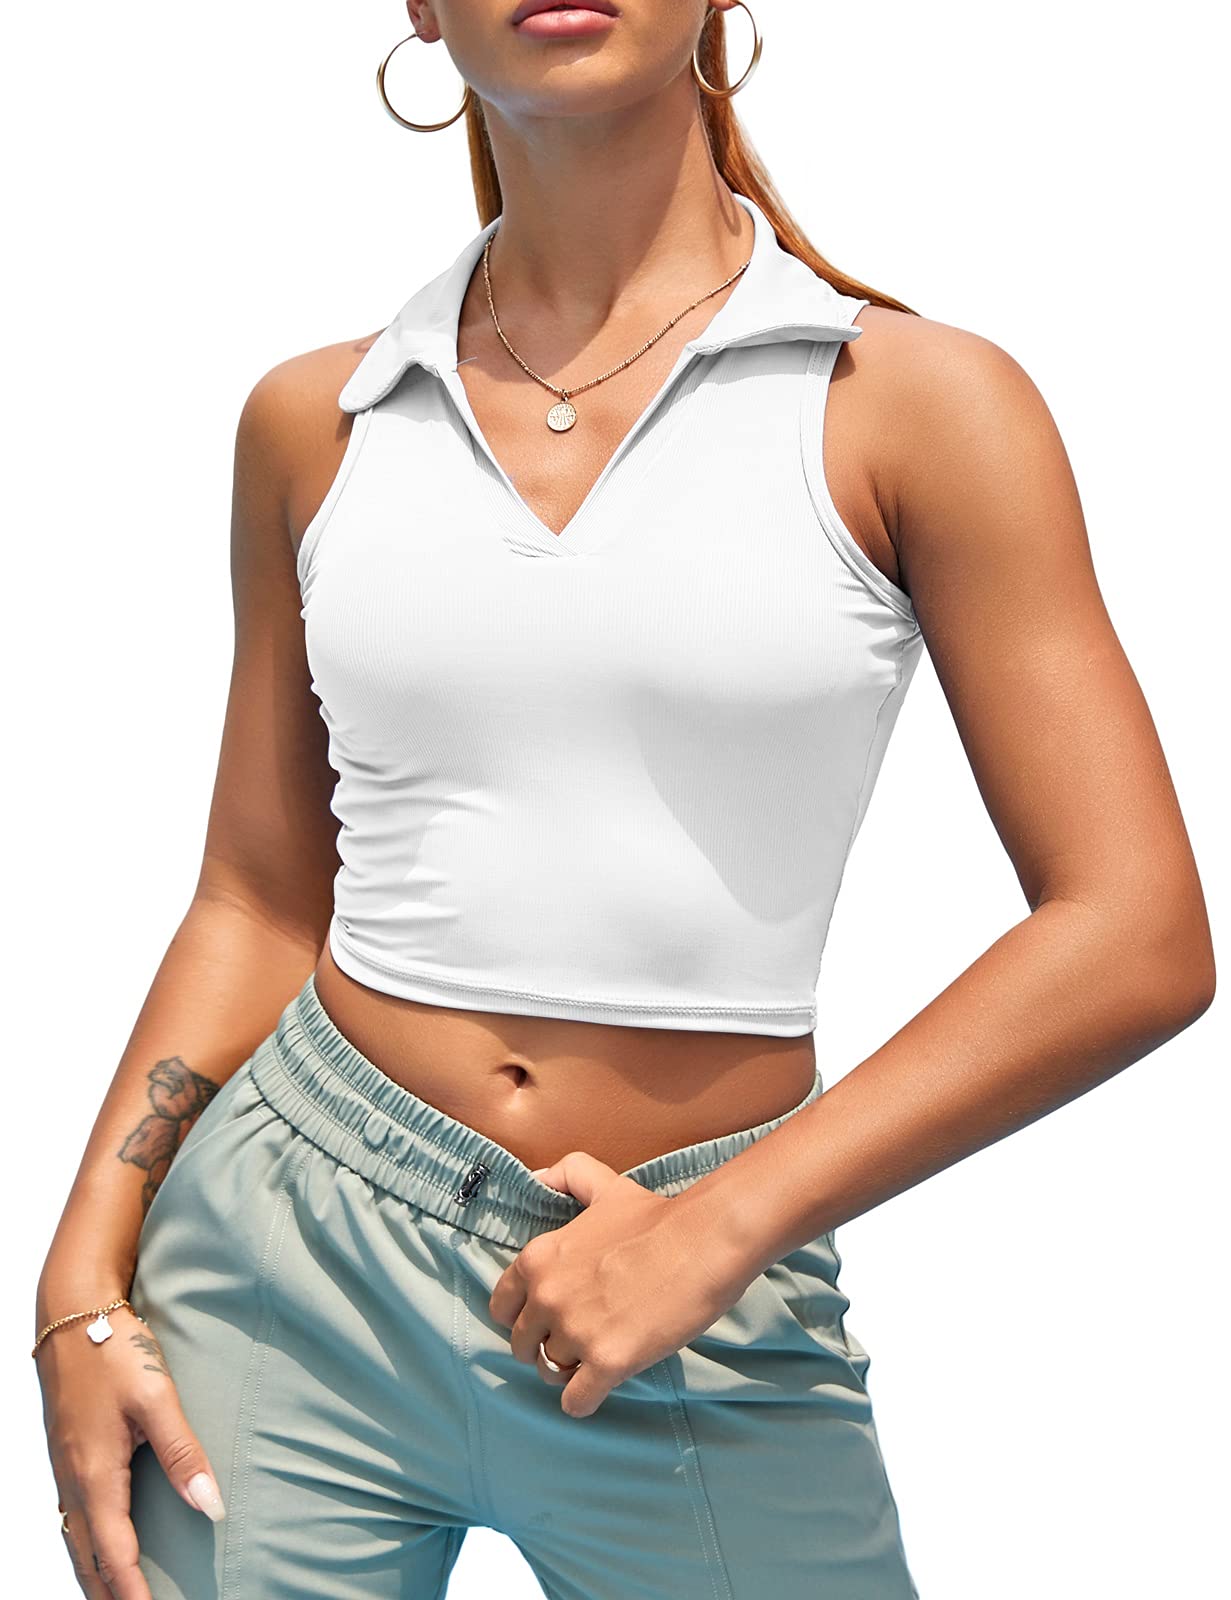 Crop Top Athletic Shirts For Women Cute Sleeveless Yoga Tops Running Gym  Workout Shirts